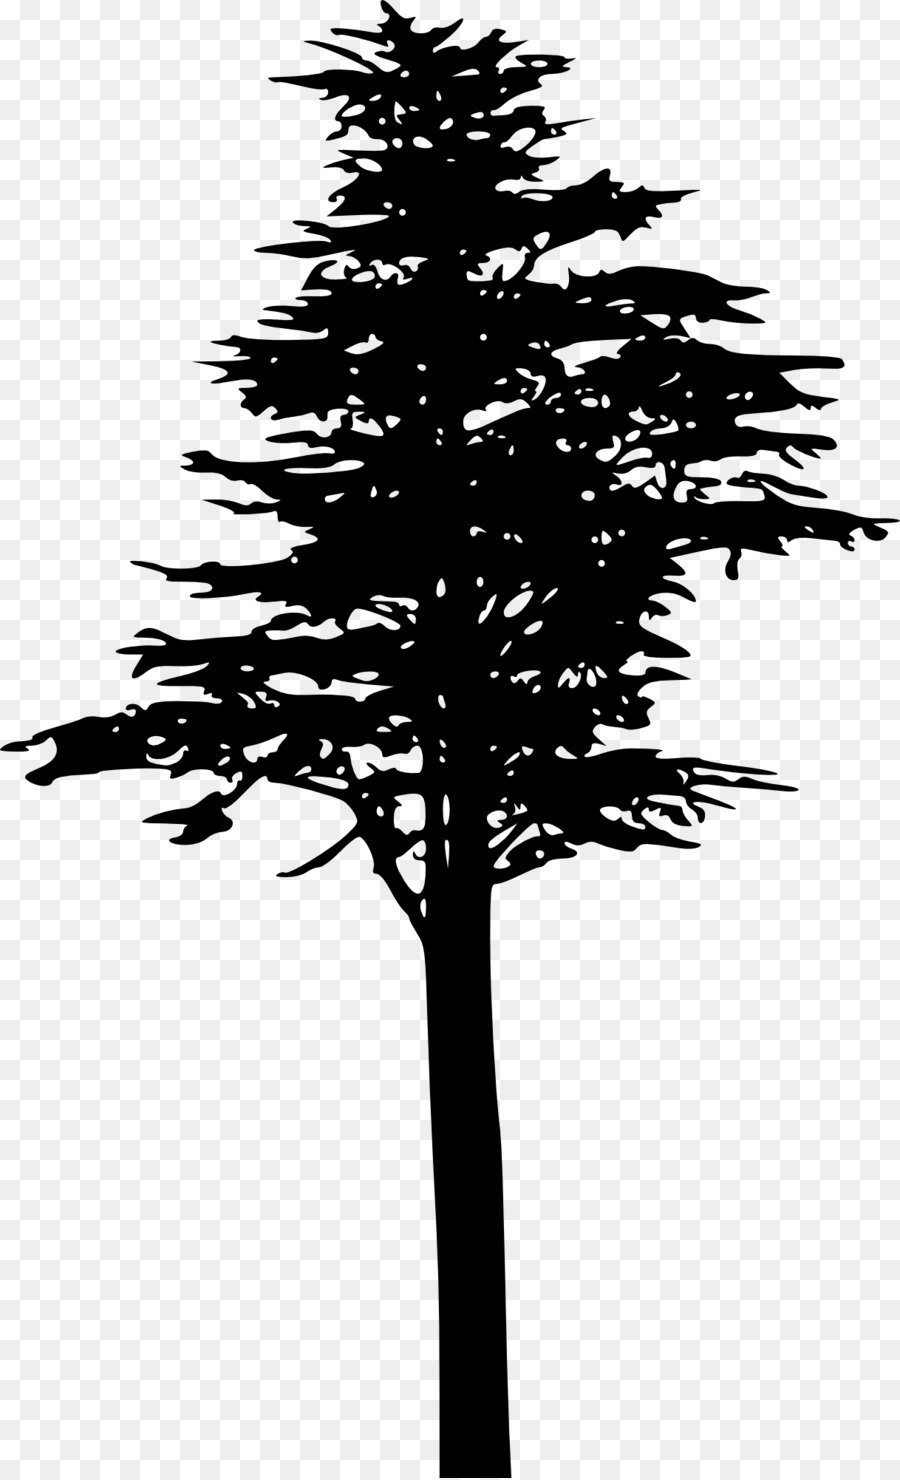 Tree Pinus contorta Silhouette Branch - coconut tree png download - 1218*2000 - Free Transparent Tree png Download.